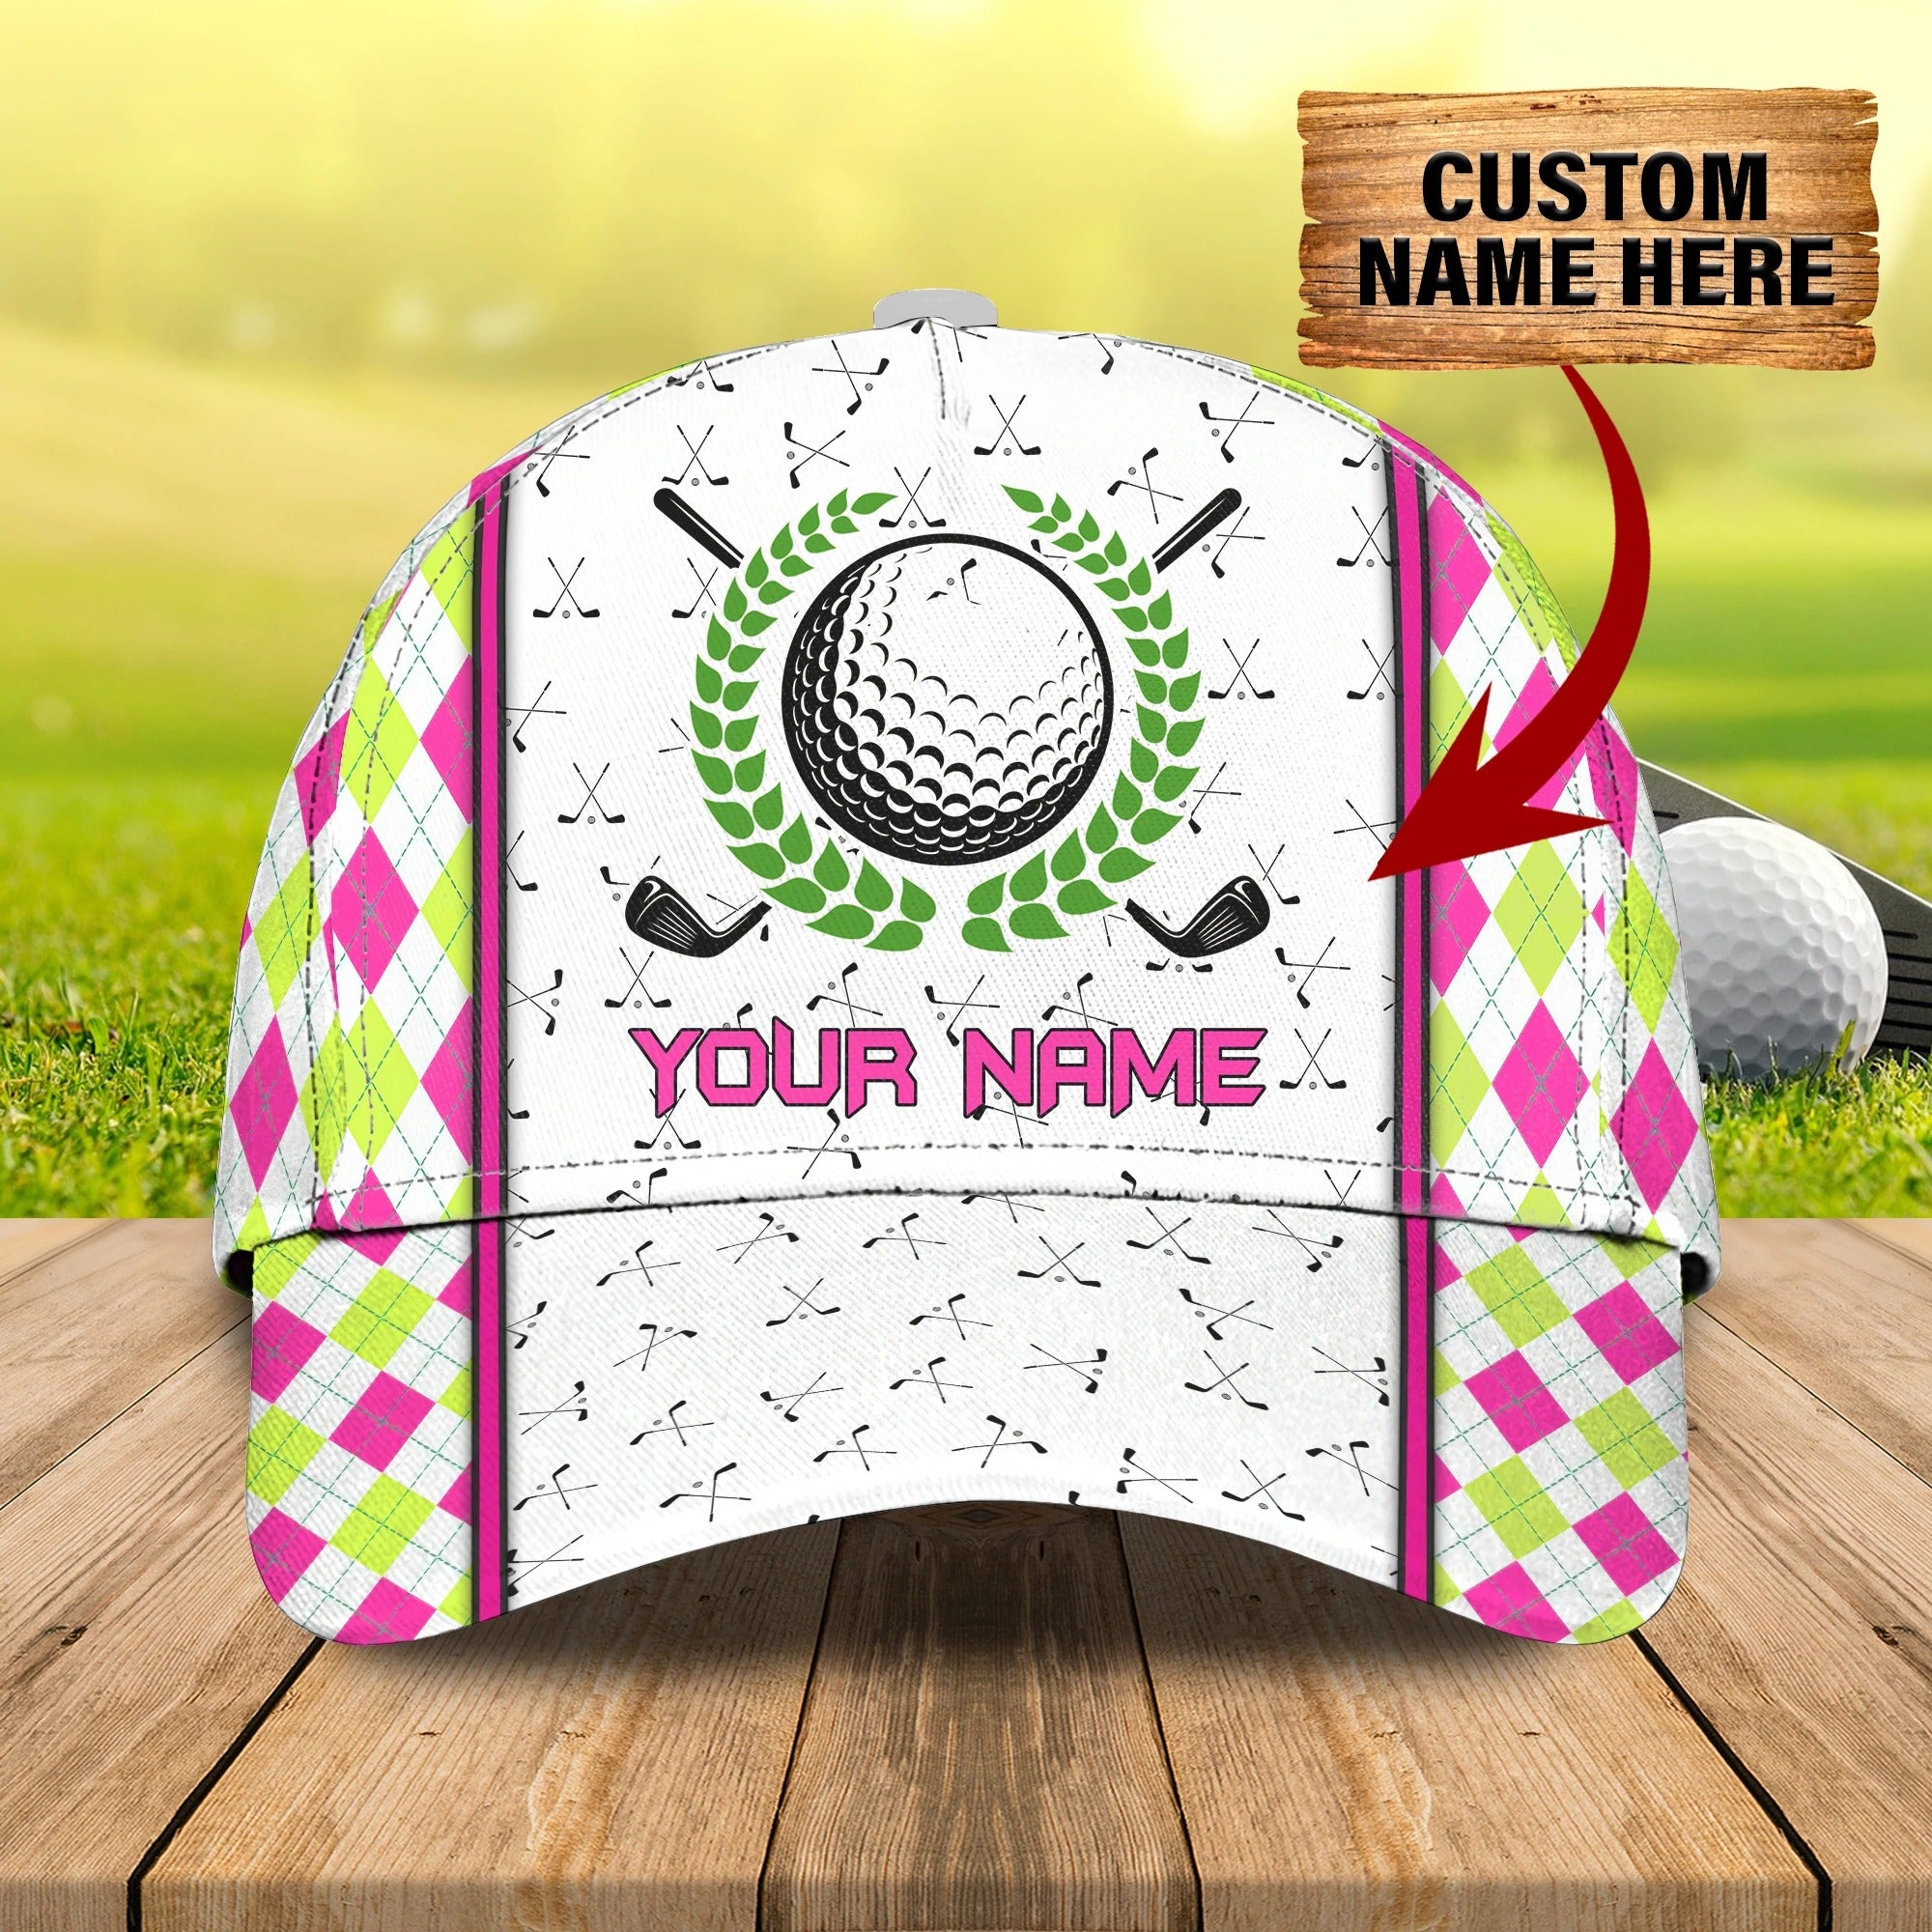 Personalized With Name Golf Cap For Men And Woman/ Golf Baseball Cap Gift To Golfer/ Birthday Golfer Presents